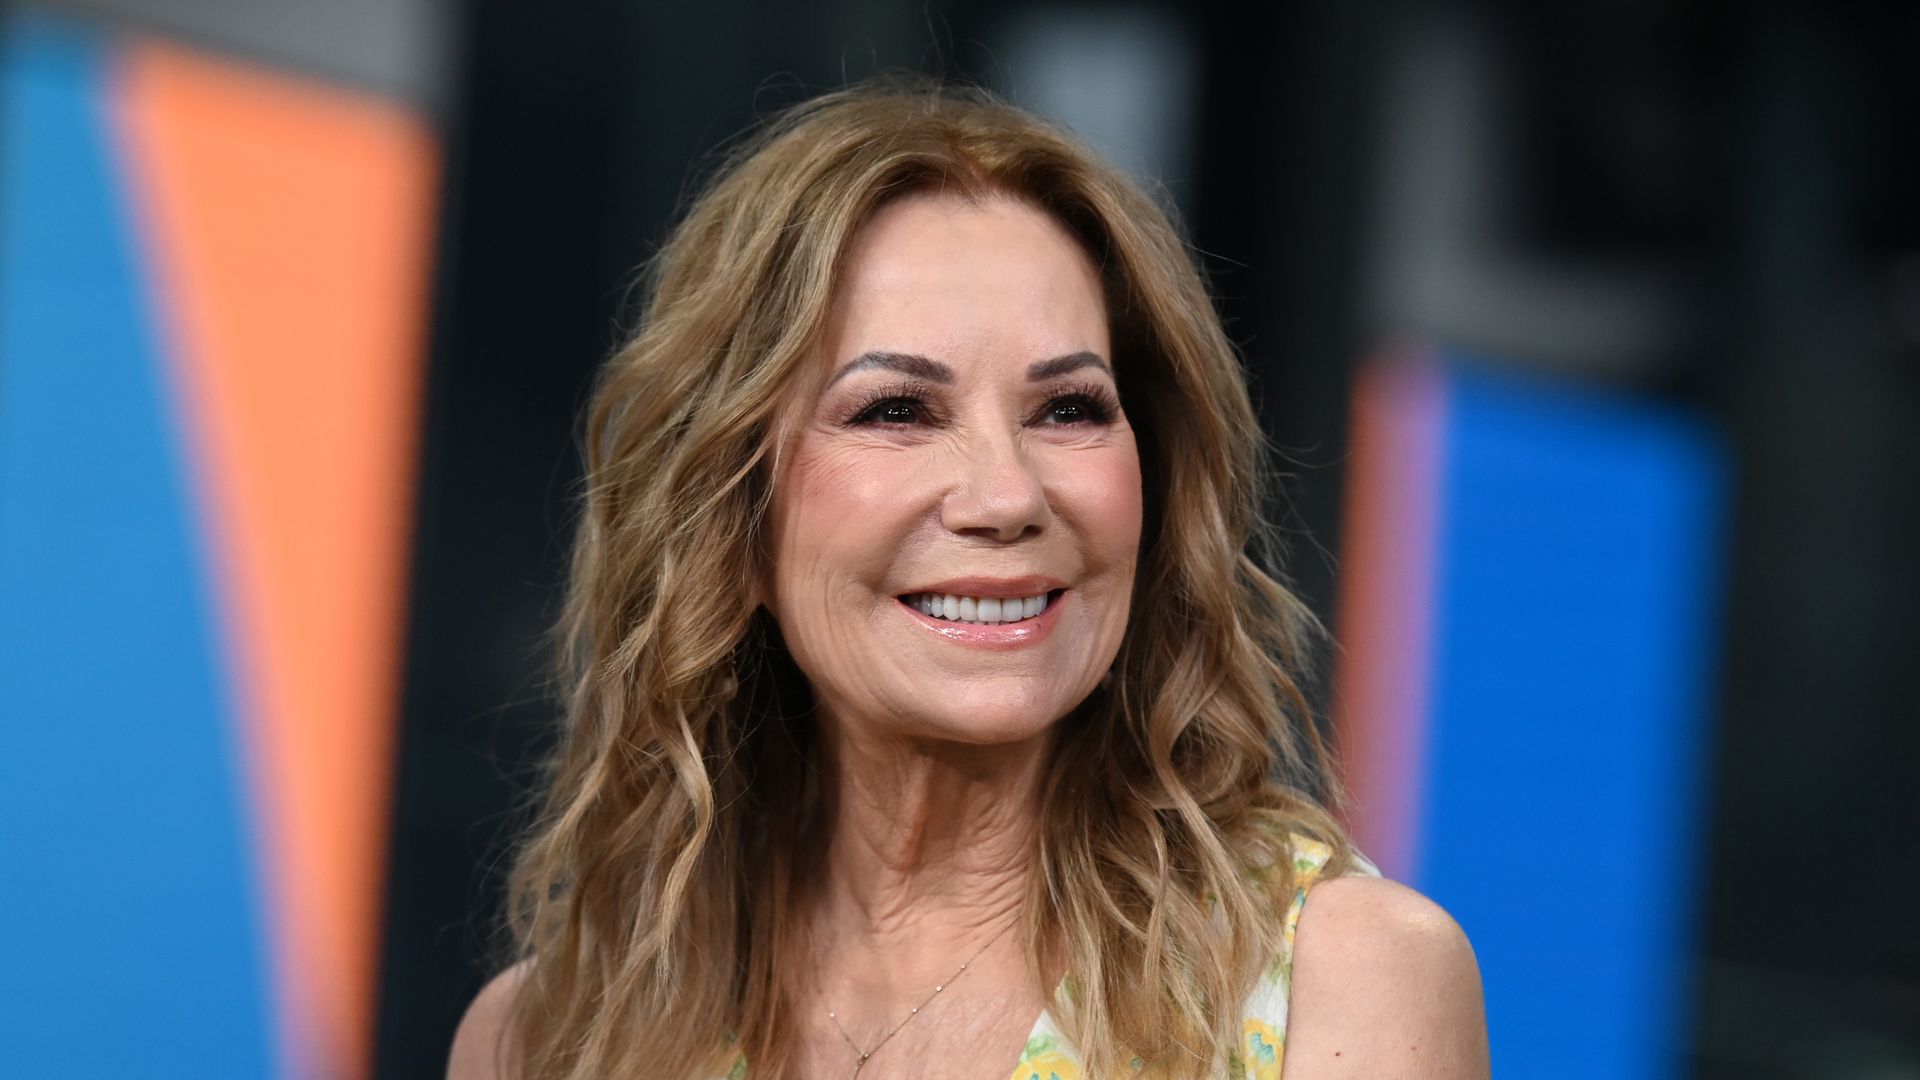 Kathie Lee Gifford's double dose of happiness revealed as she prepares to welcome two new grandchildren